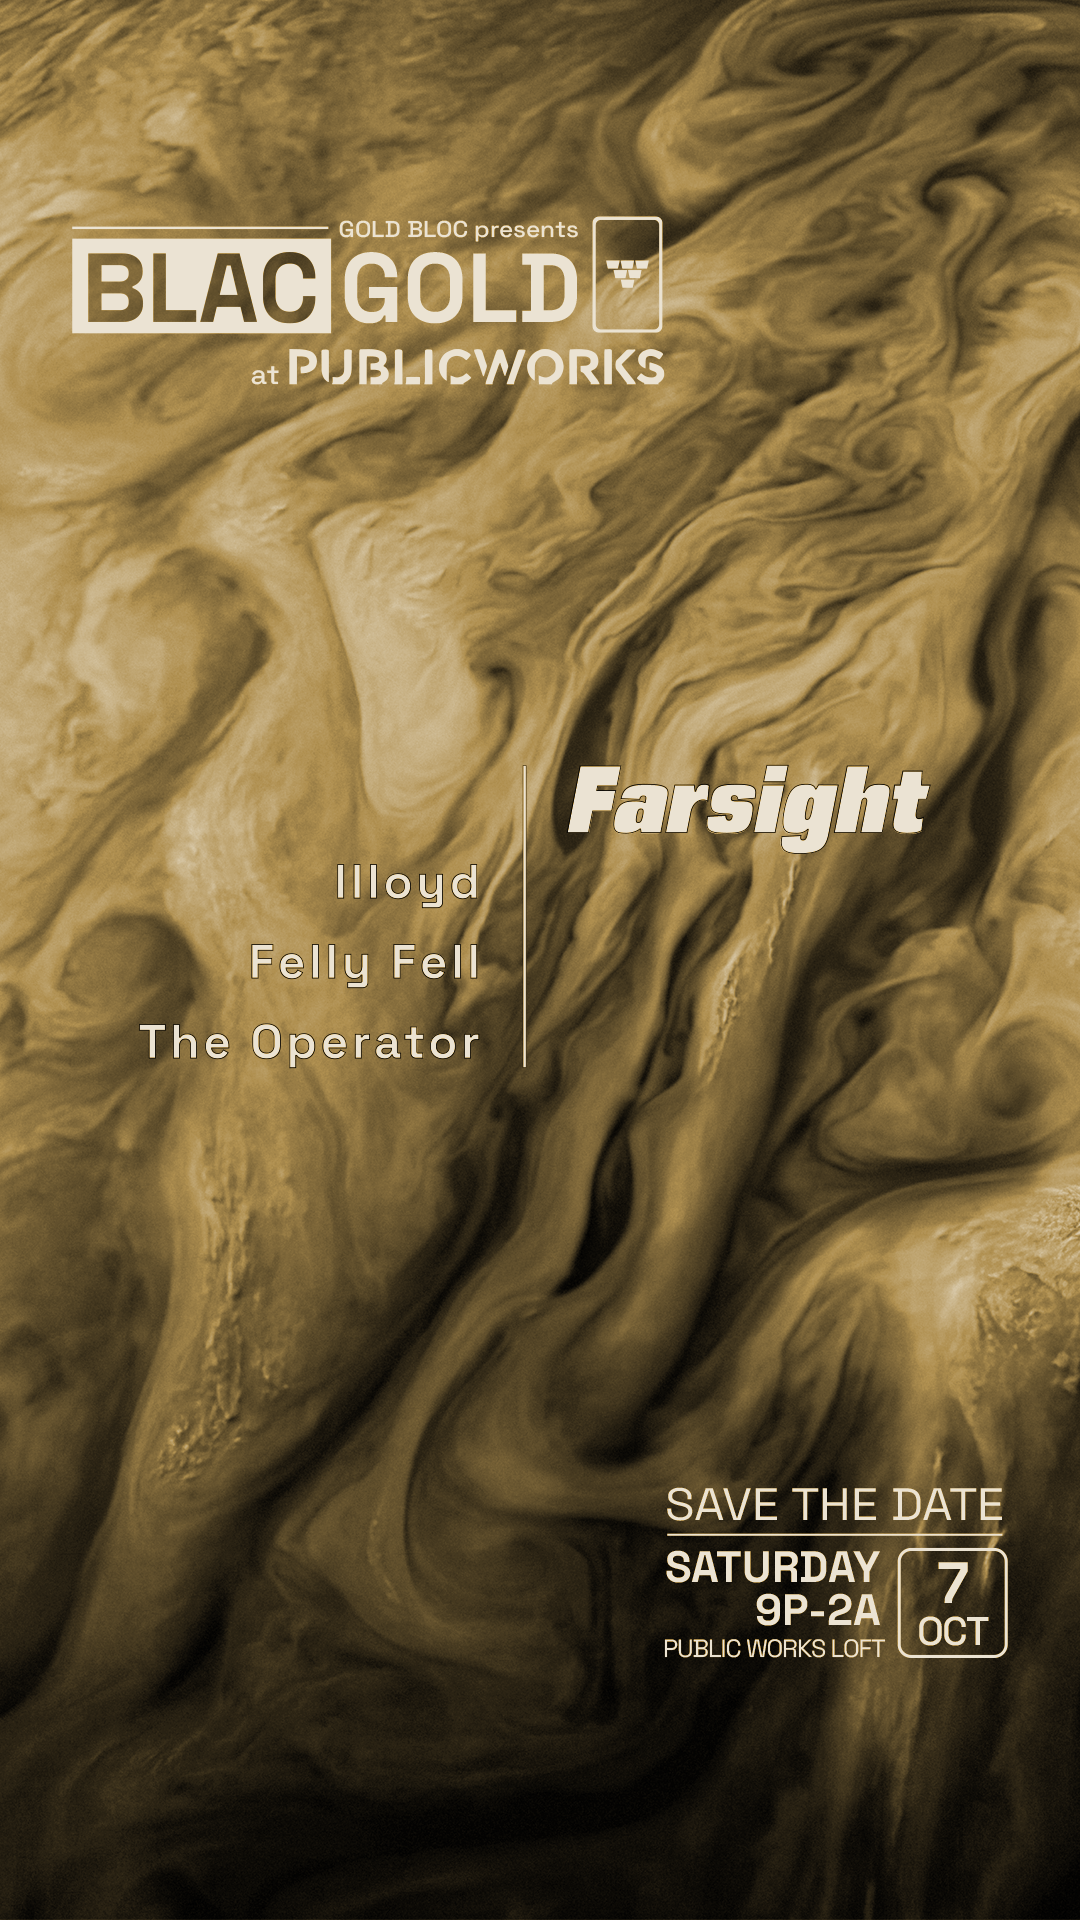 Blac Gold with Farsight, Felly Fell, llloyd and The Operator - フライヤー表